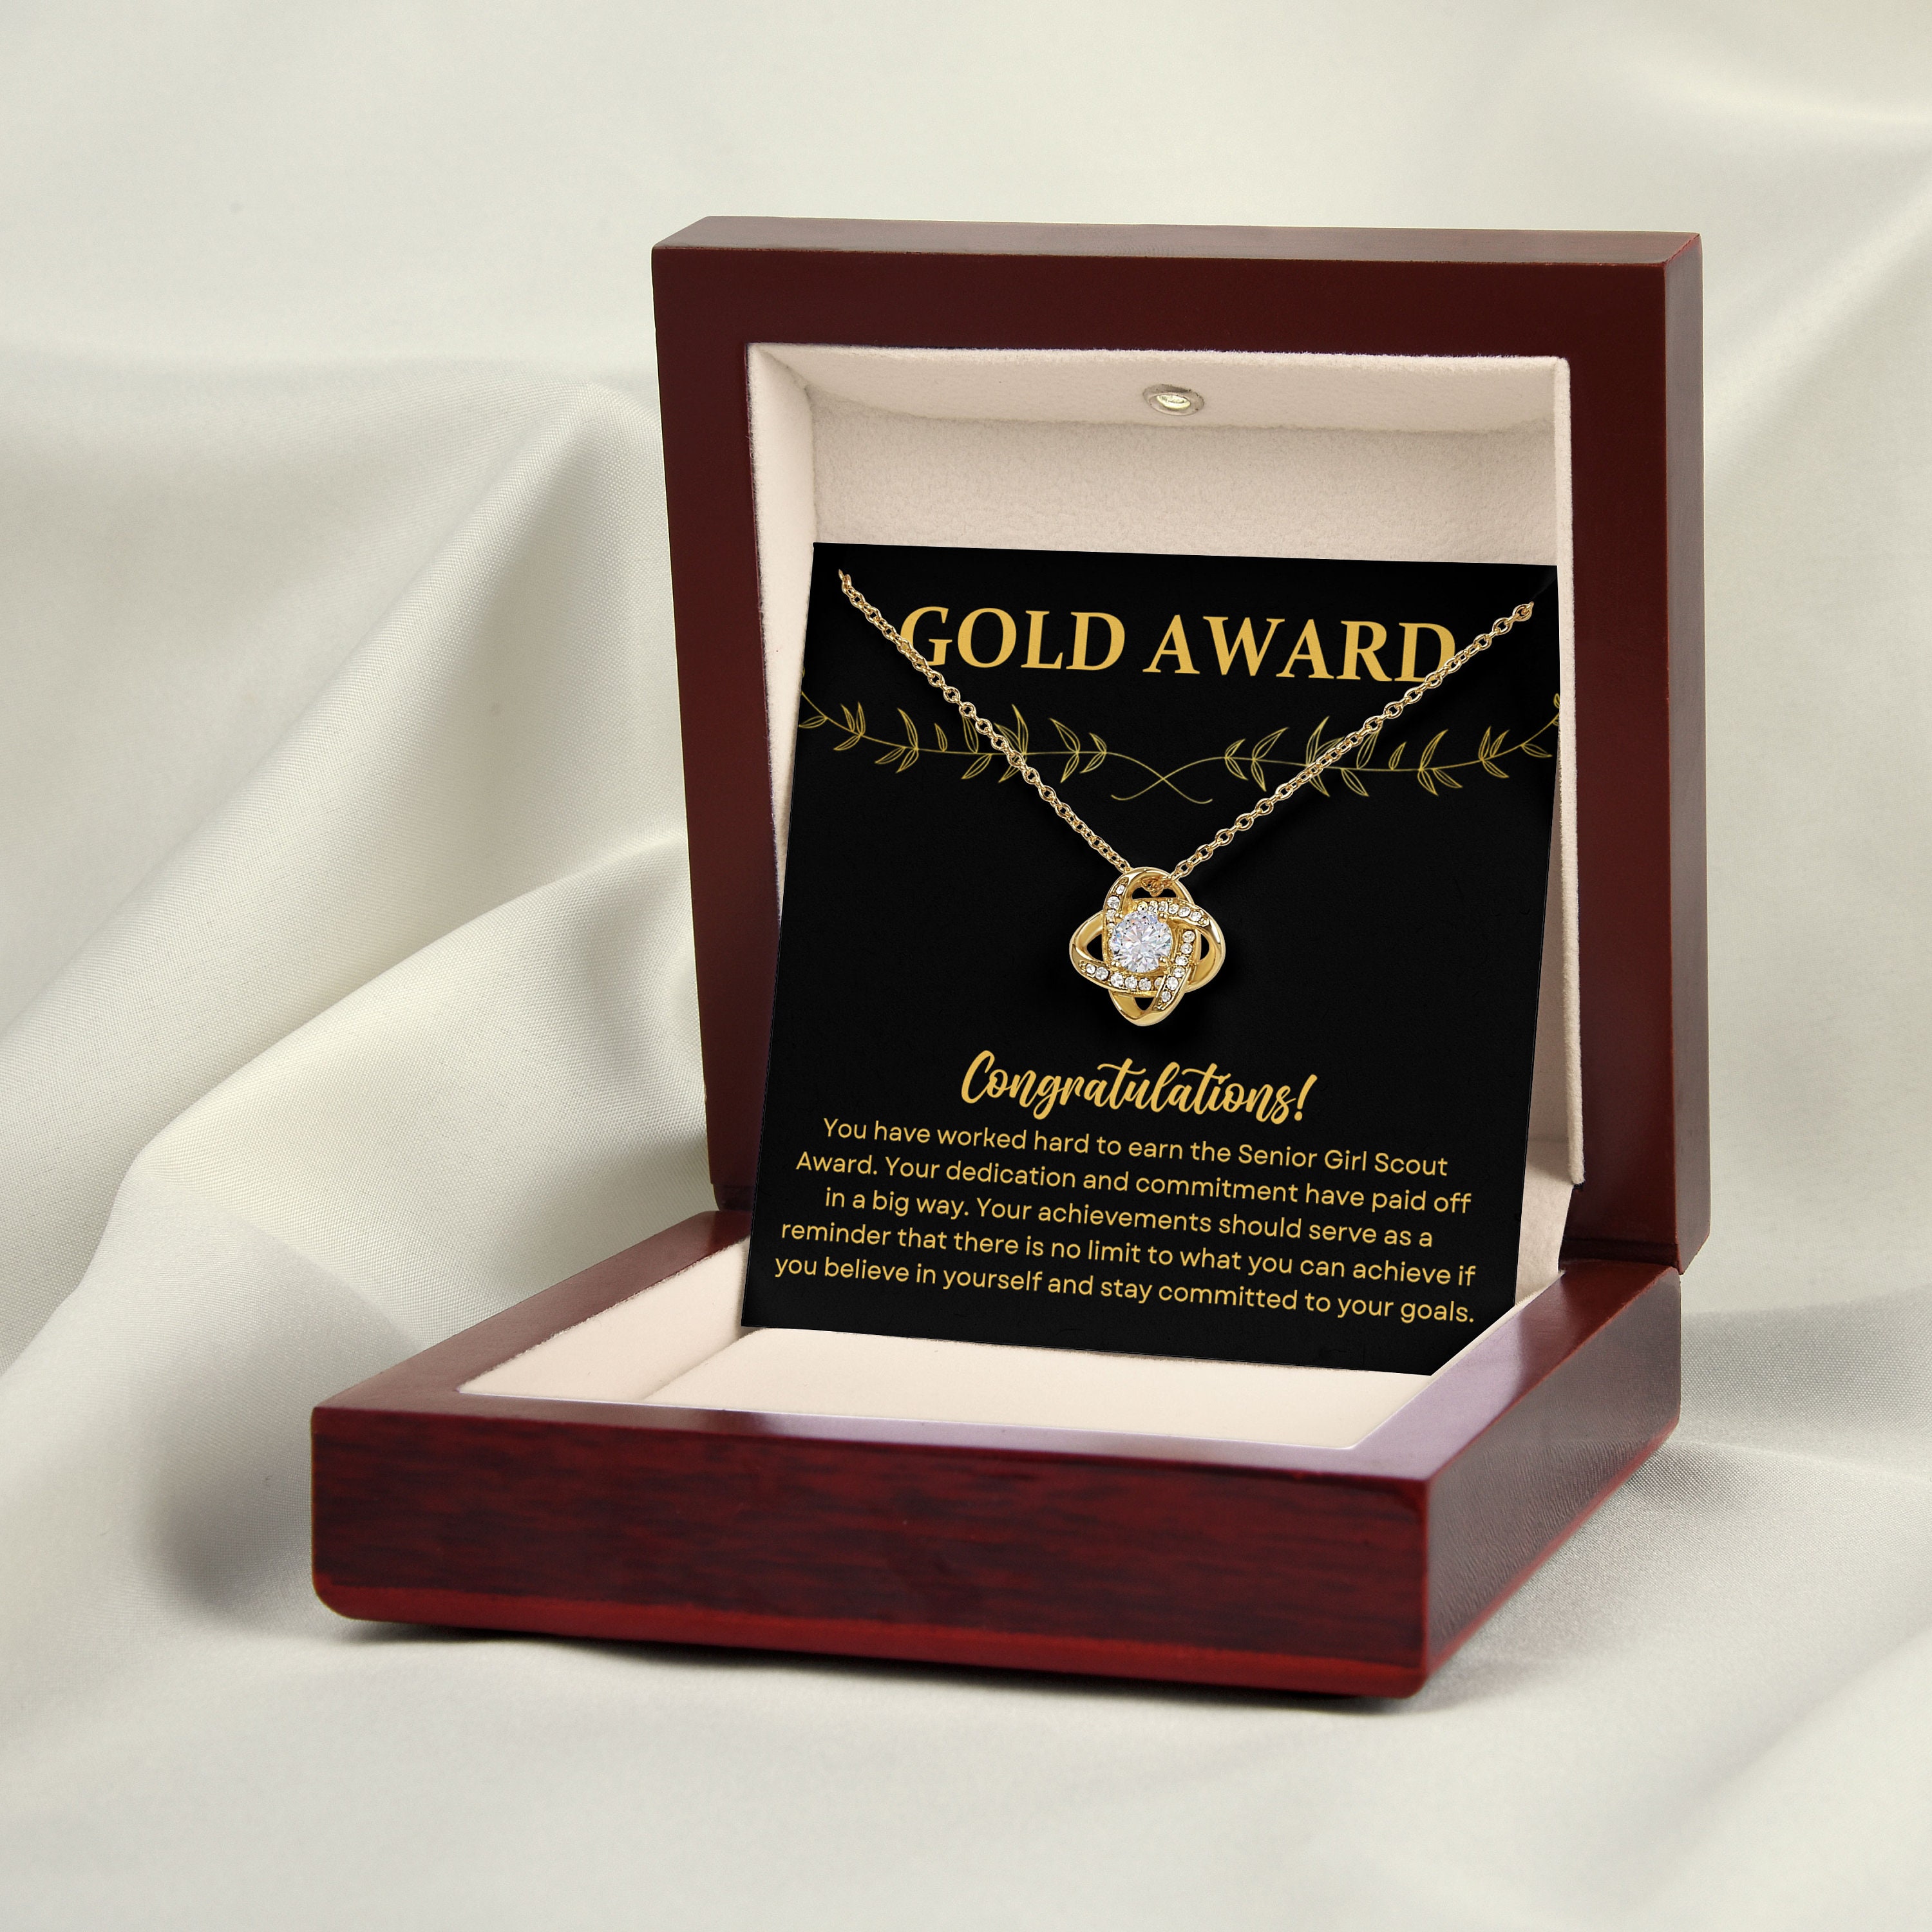 Gift for Girl Scout Gold Award, Girl Scout Gold Award Congratulations Necklace 18K Yellow Gold Finish / Luxury Box